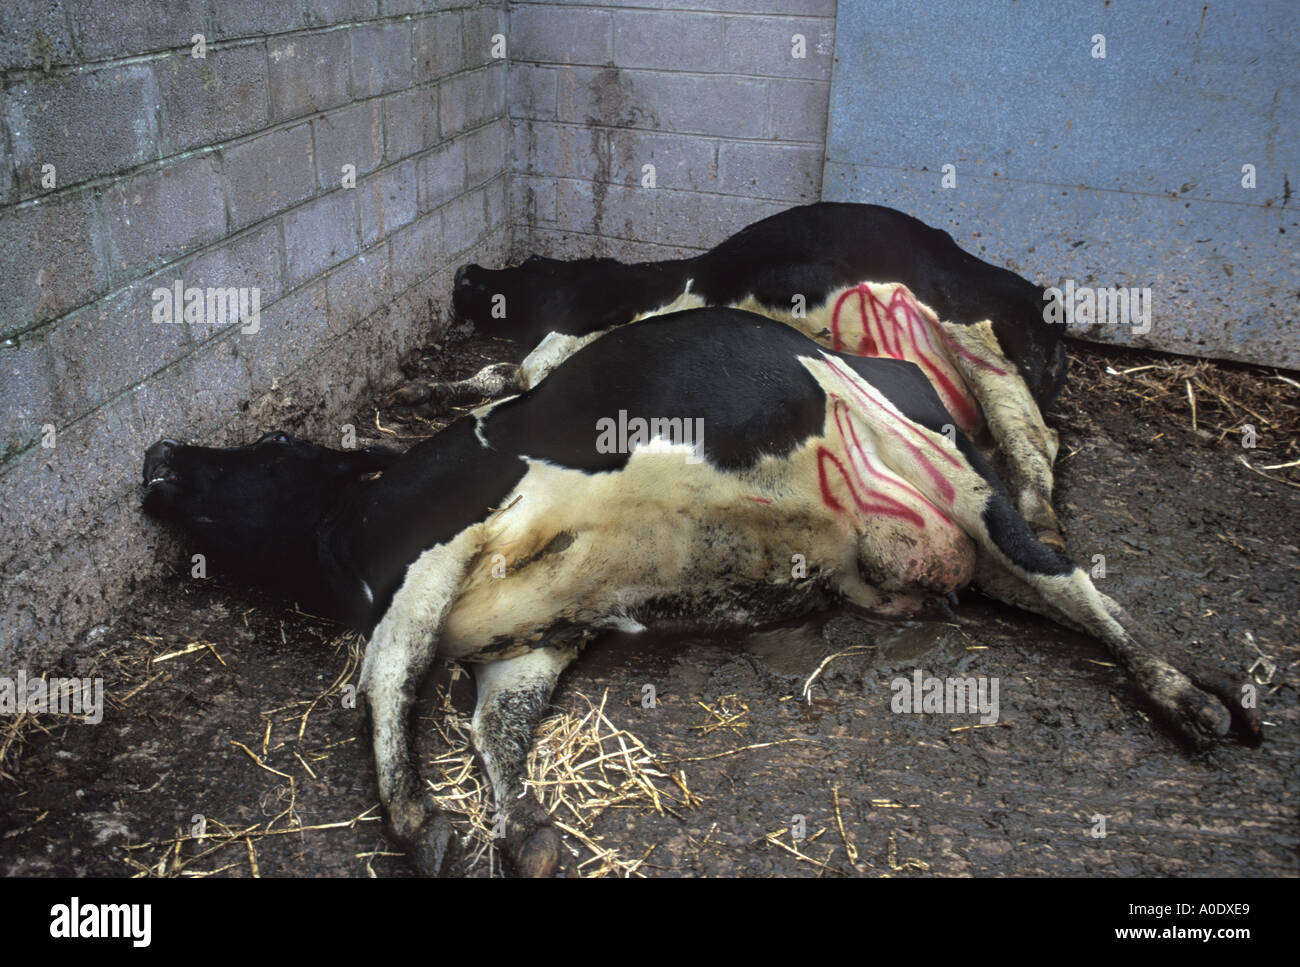 Cows slaughtered on farm in Gloucestershire England due to suspected case of Bovine Spongiform encephalopathy BSE Stock Photo